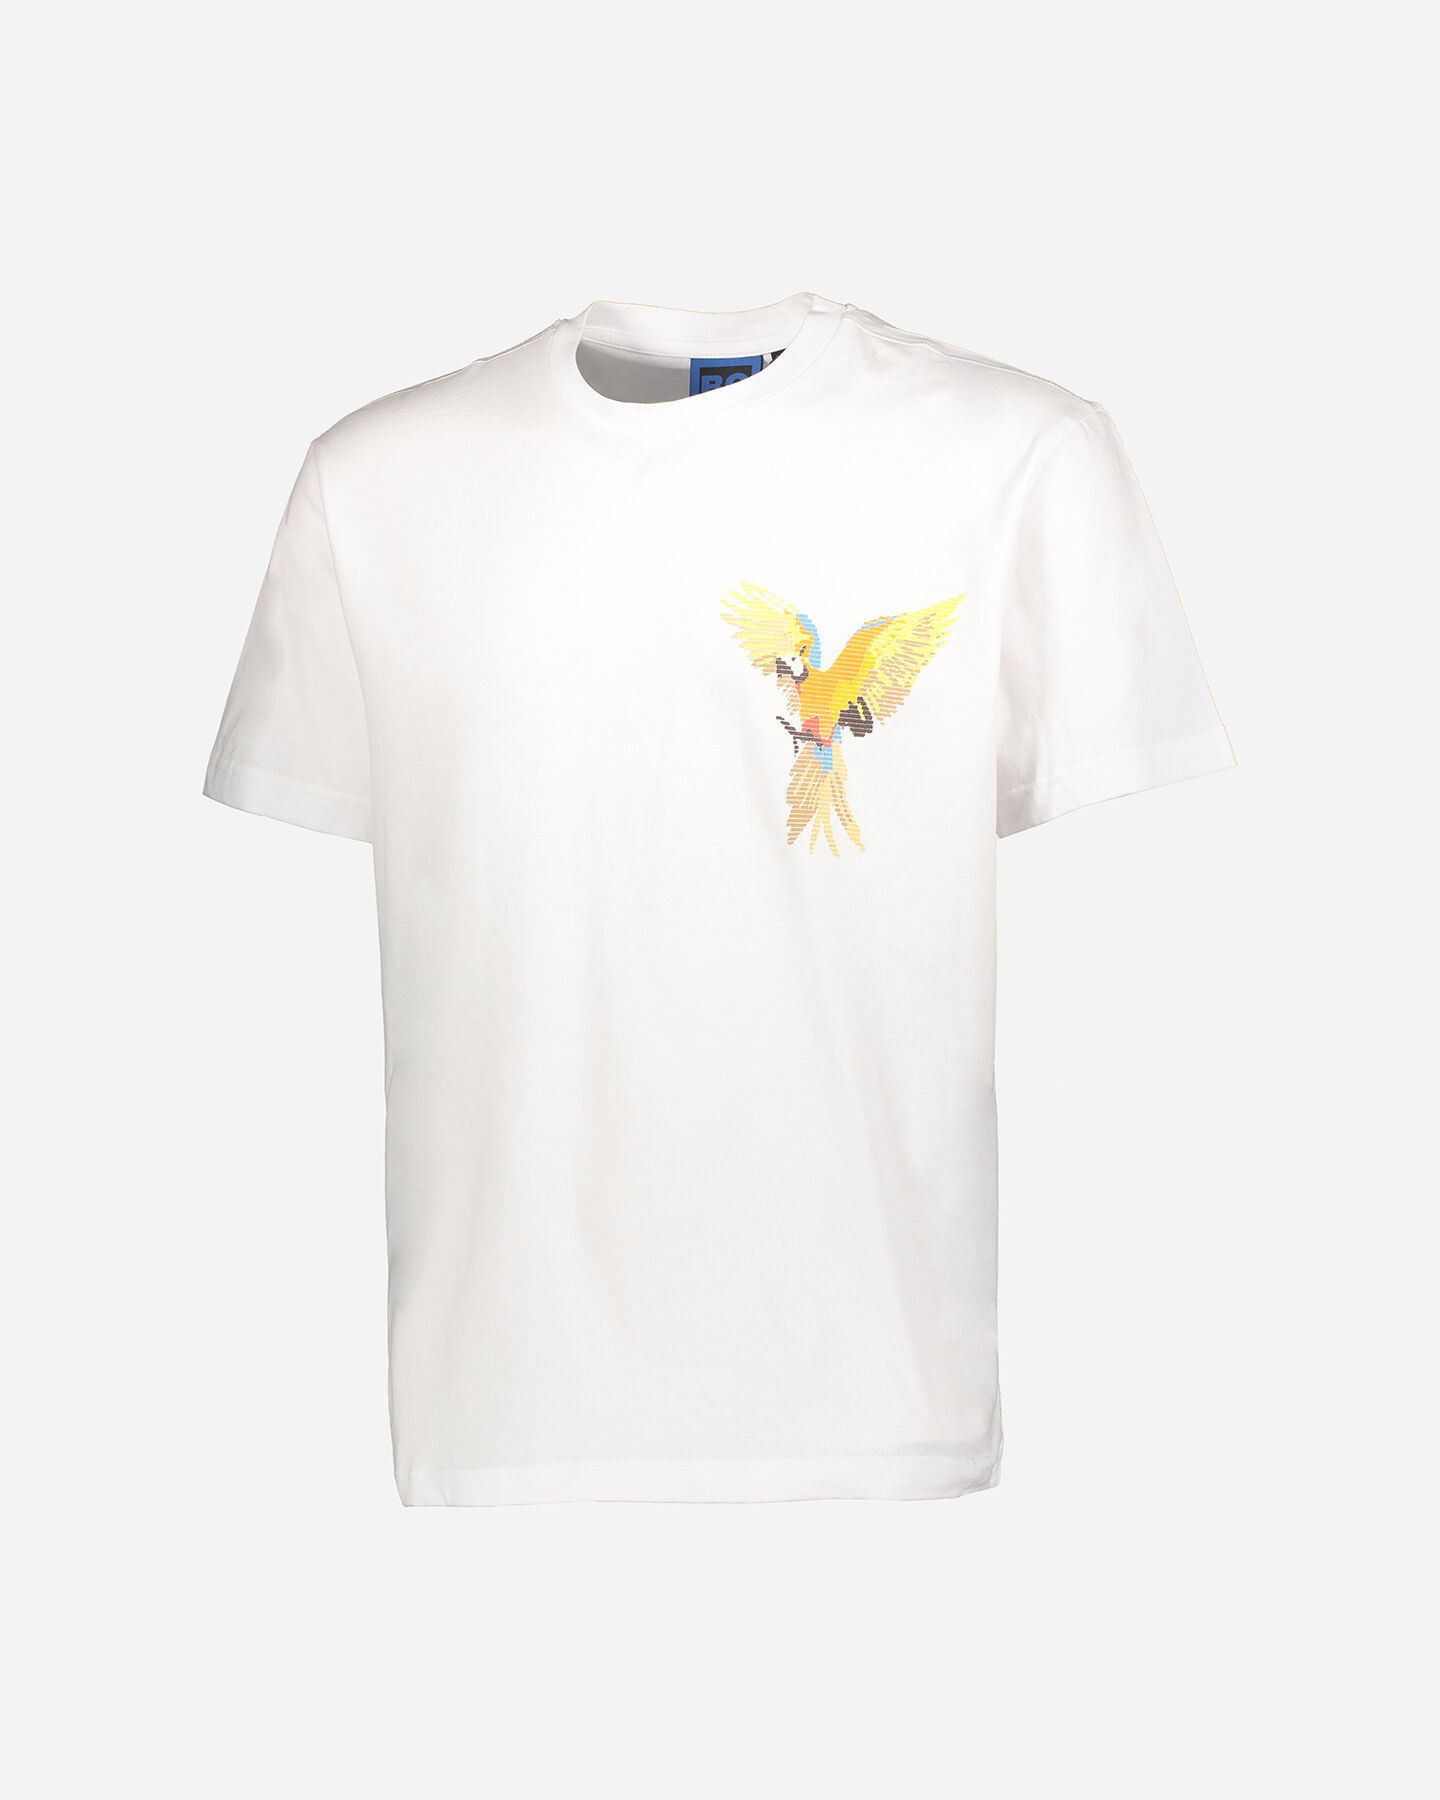  T-Shirt BEST COMPANY PARROT M S4089905|01|S scatto 0